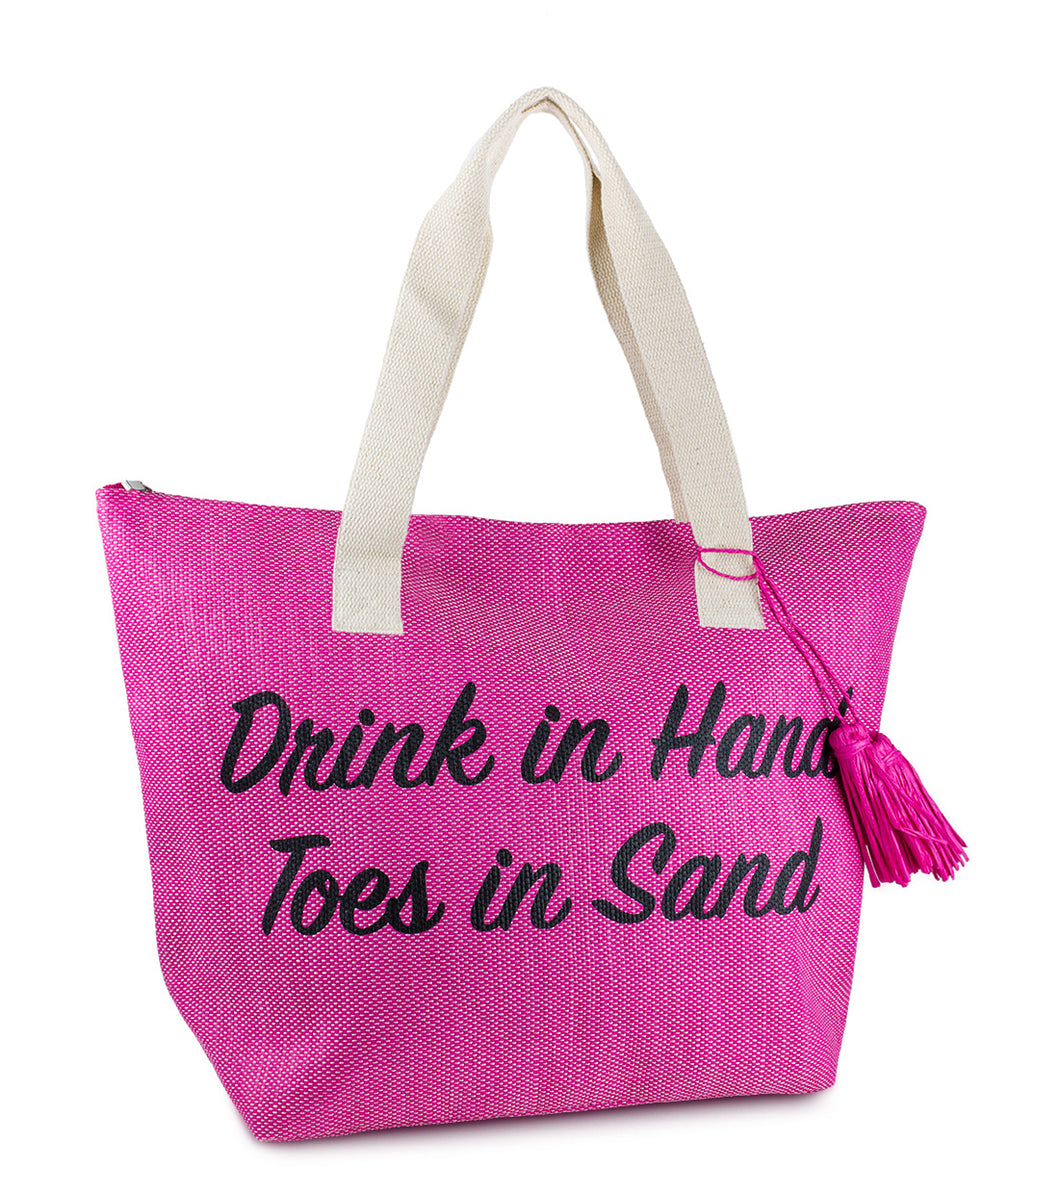 Drink in Hand Toes in Sand Insulated Tote Bag - Just Jamie